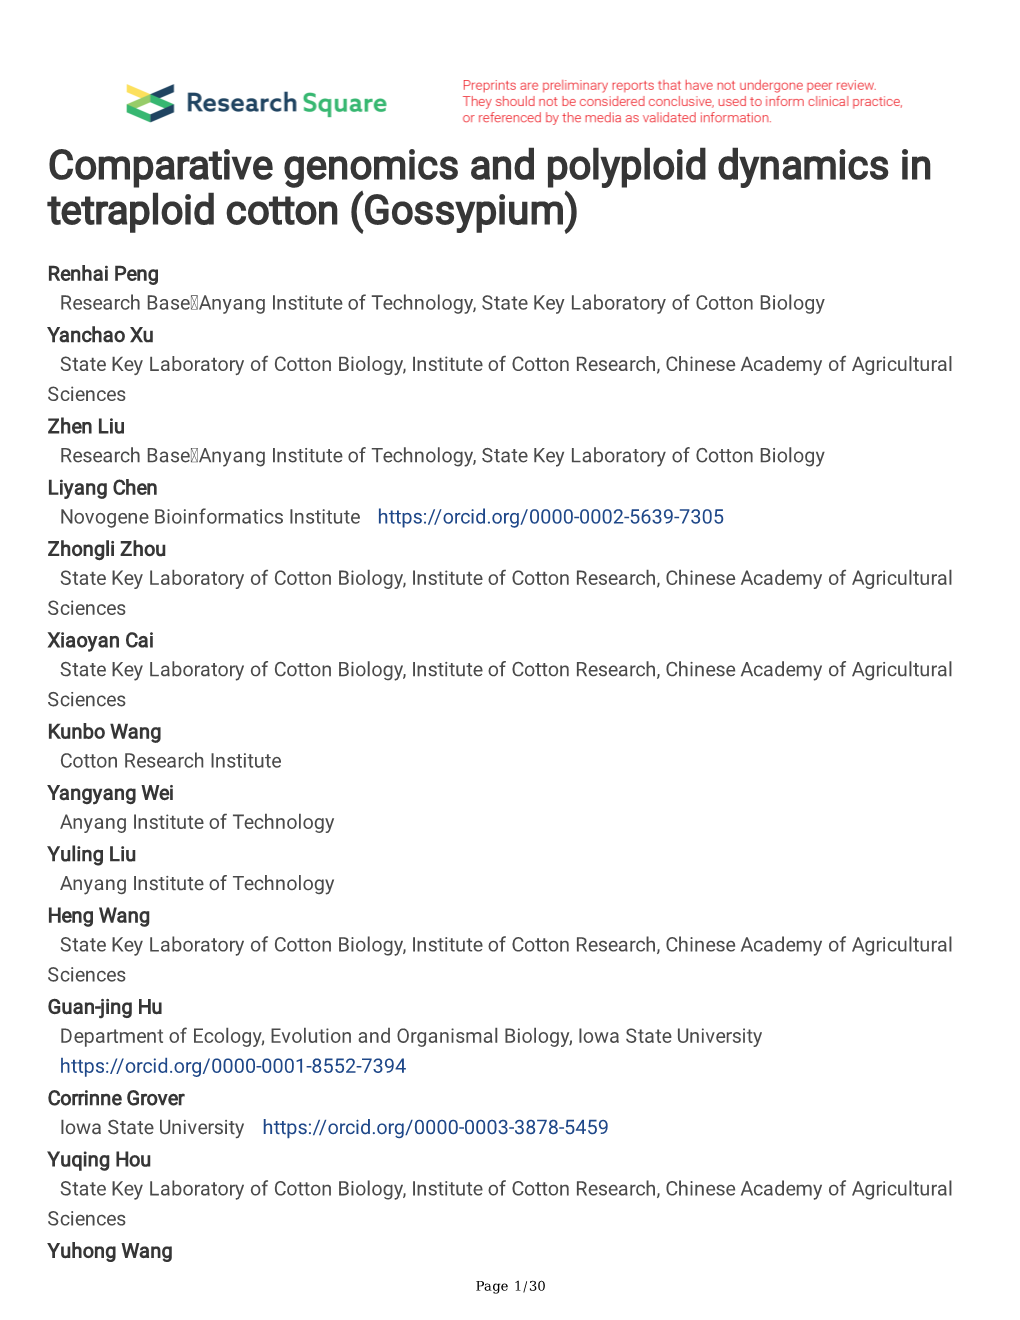 Comparative Genomics and Polyploid Dynamics in Tetraploid Cotton (Gossypium)